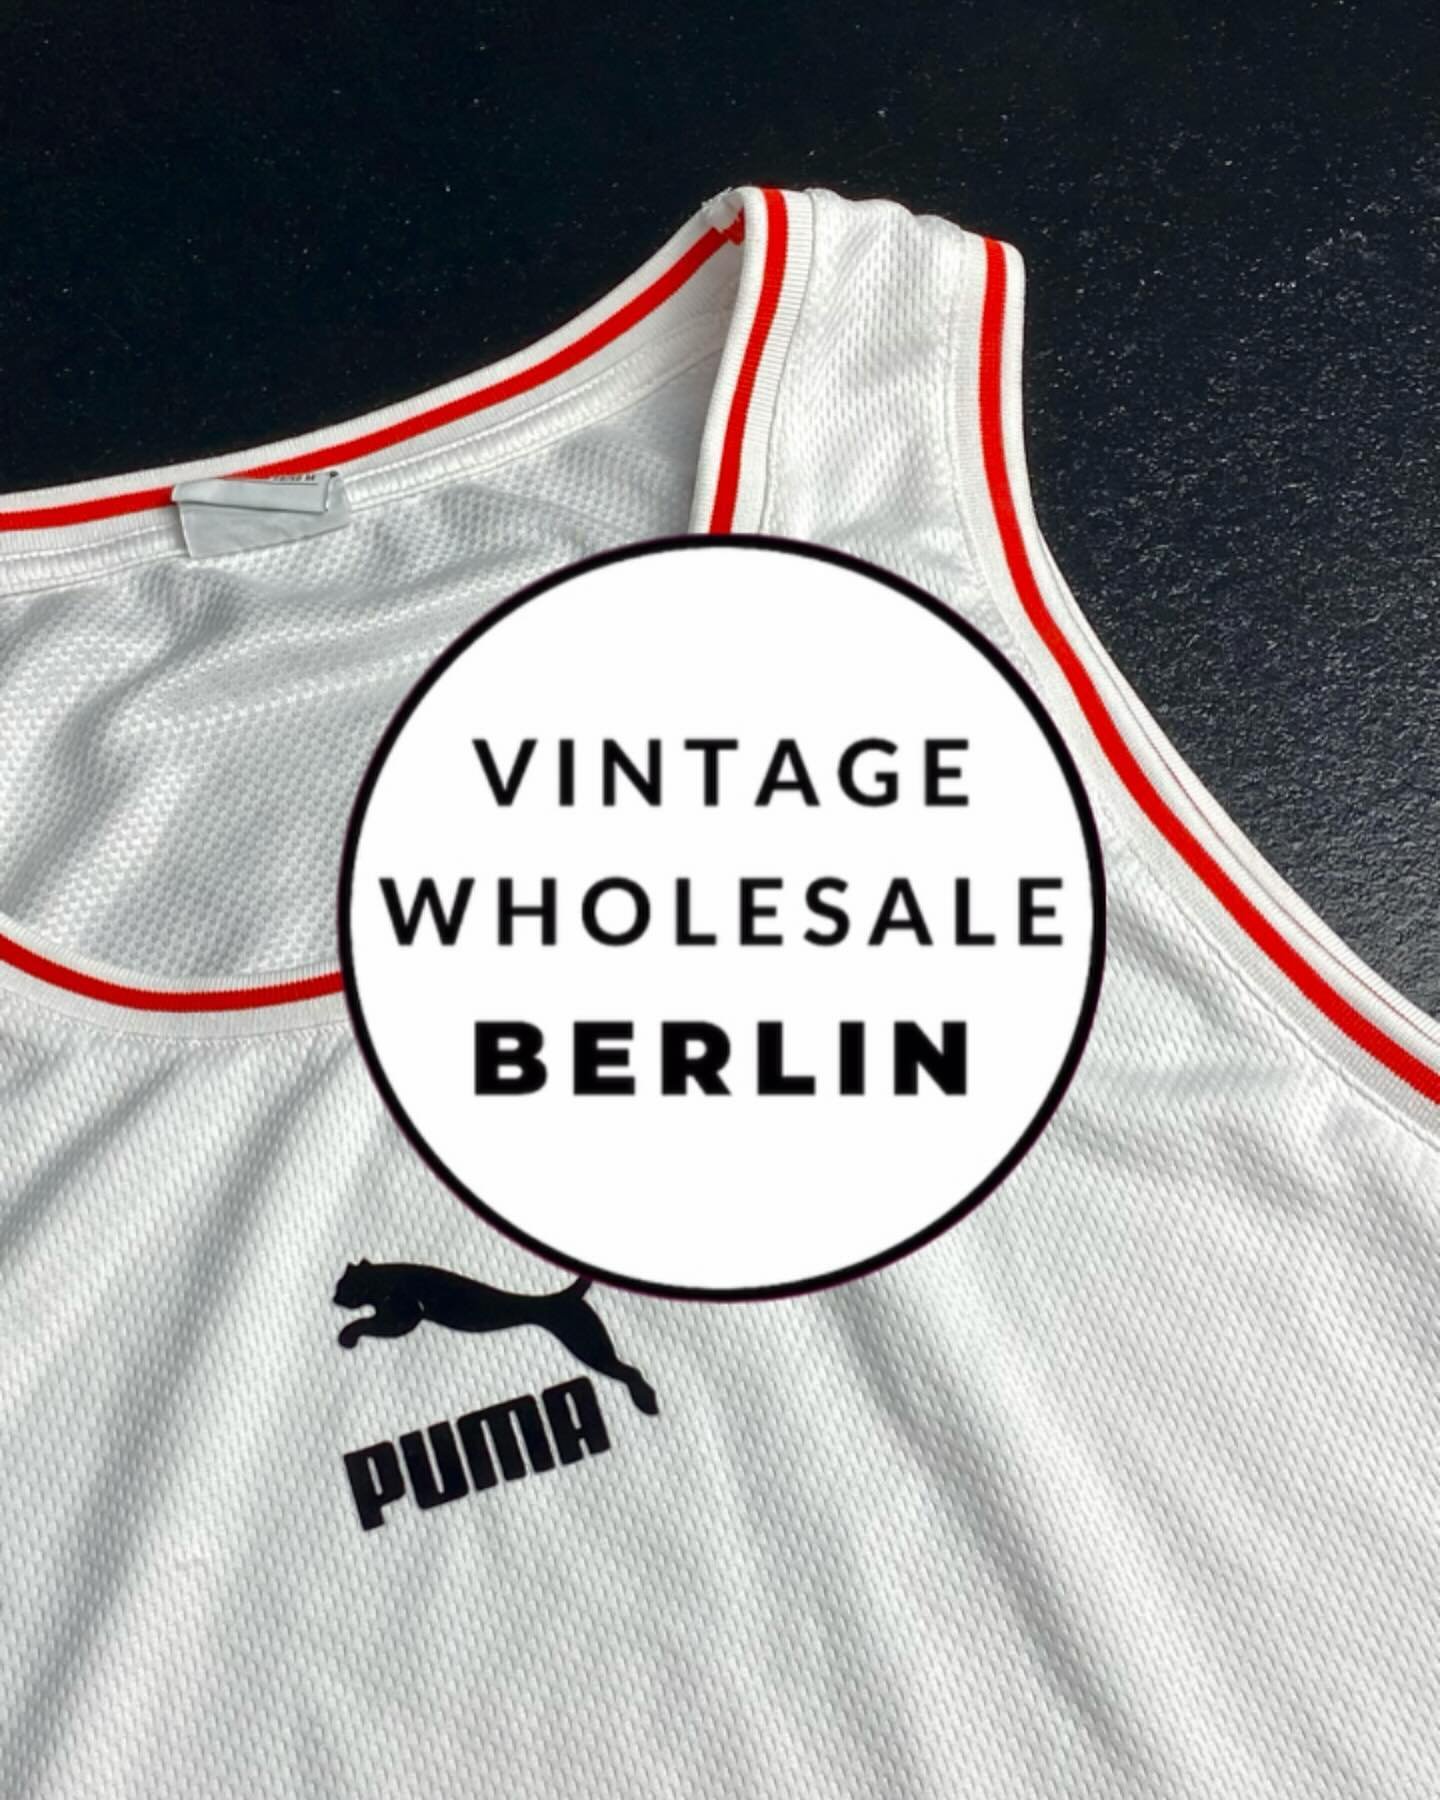 VINTAGE TANK TOPS
👇 @vintage_wholesale_berlin 👇

As the weather is becoming warmer and the days longer, the sleeves are getting shorter - tank top season is coming 🎽

This is a random collection of our vintage tank top variety:
Men&rsquo;s or ladi